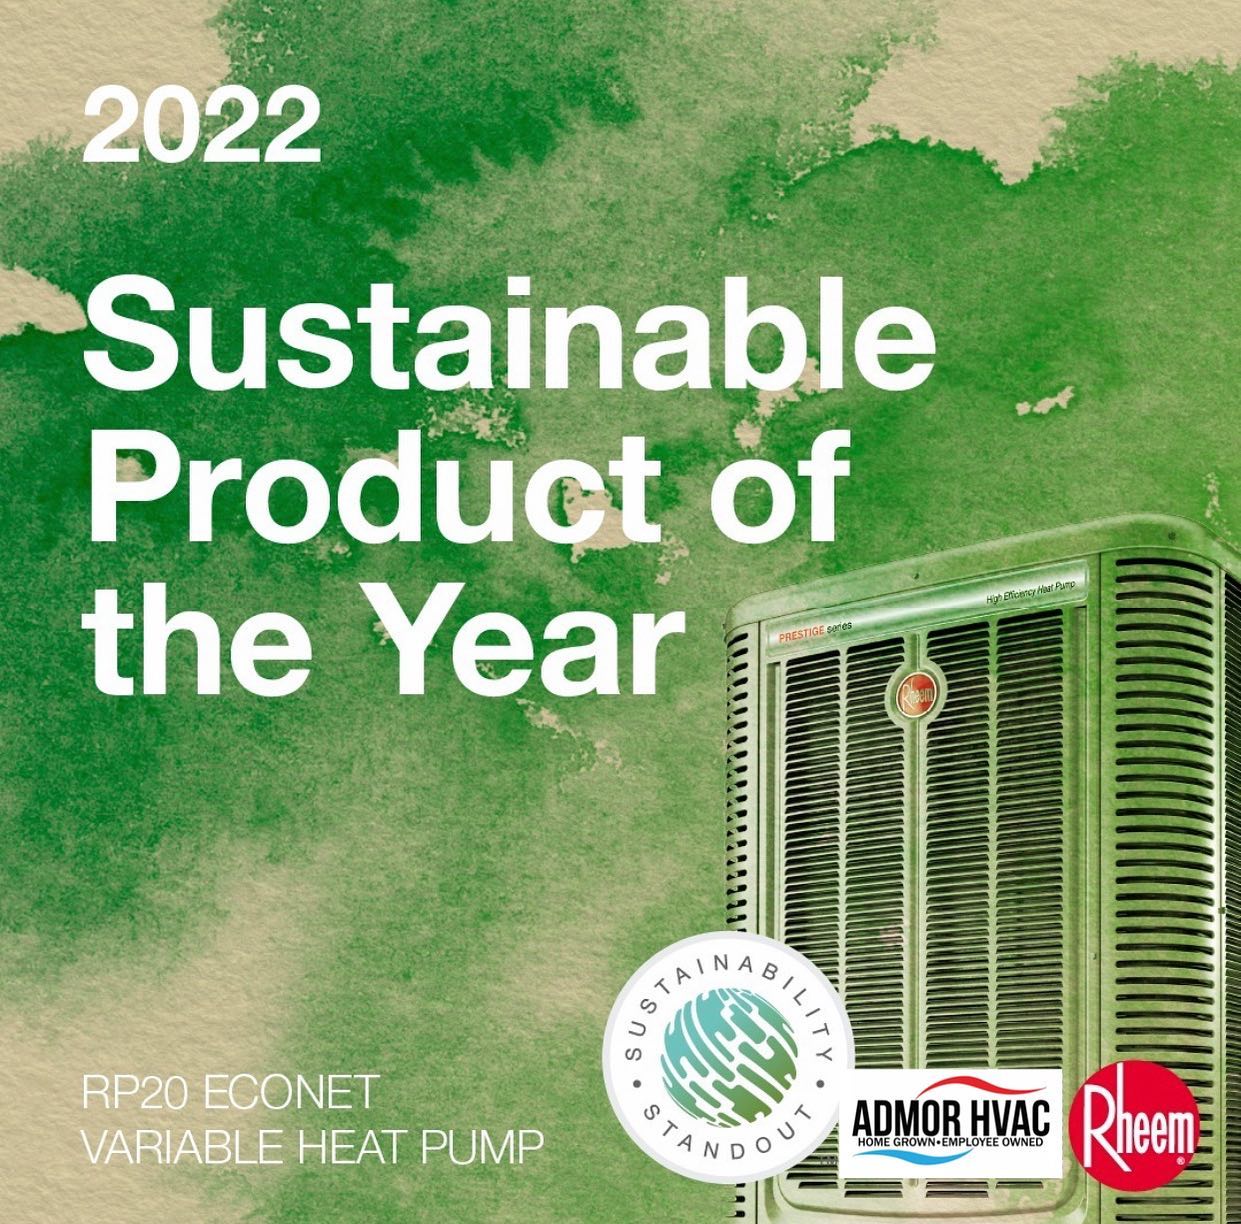 Rheem is committed to doing good by our planet and this has been recognized by @greenbuildermedia who has named the Rheem RP20 with EcoNet the 2022 Sustainable Product of the Year!  This is a humbling honor that makes Rheem even more committed to creating innovative technologies that power and cool a greener future. 
#oahuhvac #mauihvac #kauaihvac #konahvac #hawaiihvac #hawaiihvaccontractor #hawaiihvacsuperstore #rheem #rheemairconditioning #hawaii #808 #hawaiihomes #hawaiirealestate #hawaiibuilders #homedesign #hvac #hvacowner #hvacdesign #hvactechnician #hvaccontractor #hvacinstallation #airconditioning #airconditioninginstallation #airconditioningcontractor